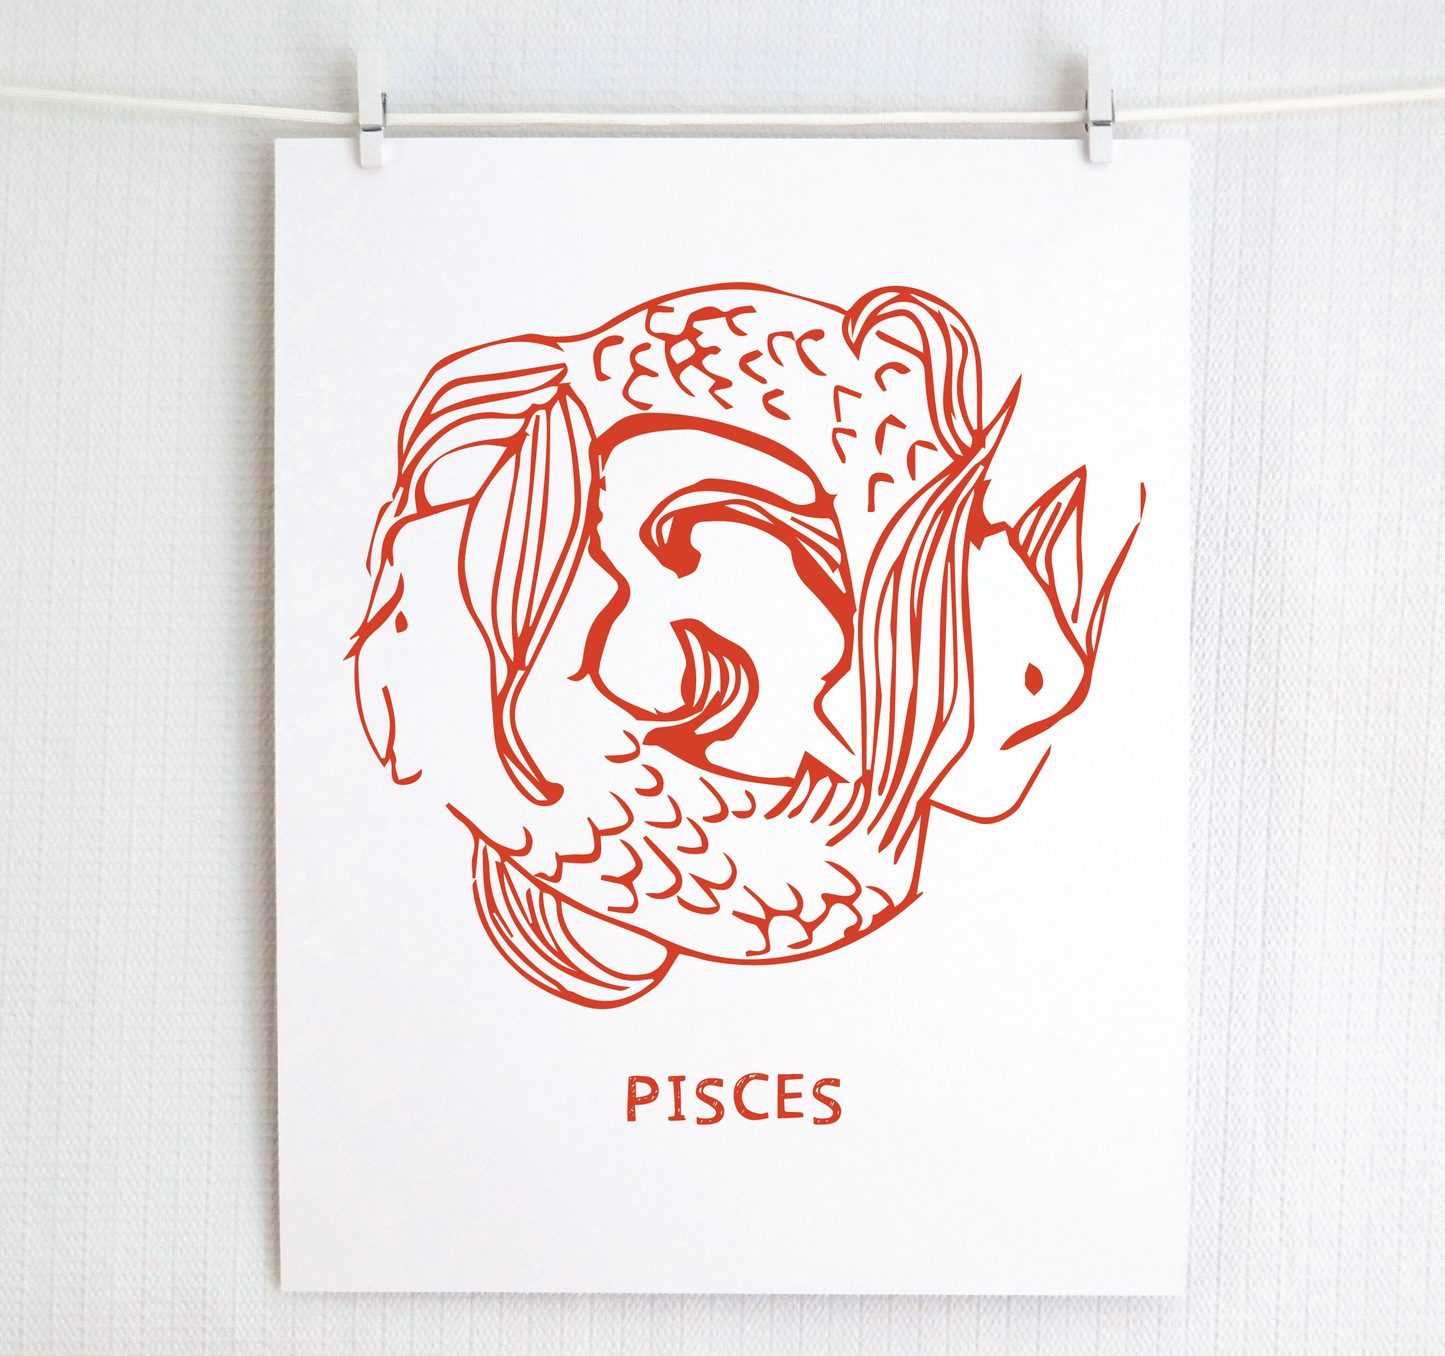 Signs of the Zodiac: PISCES